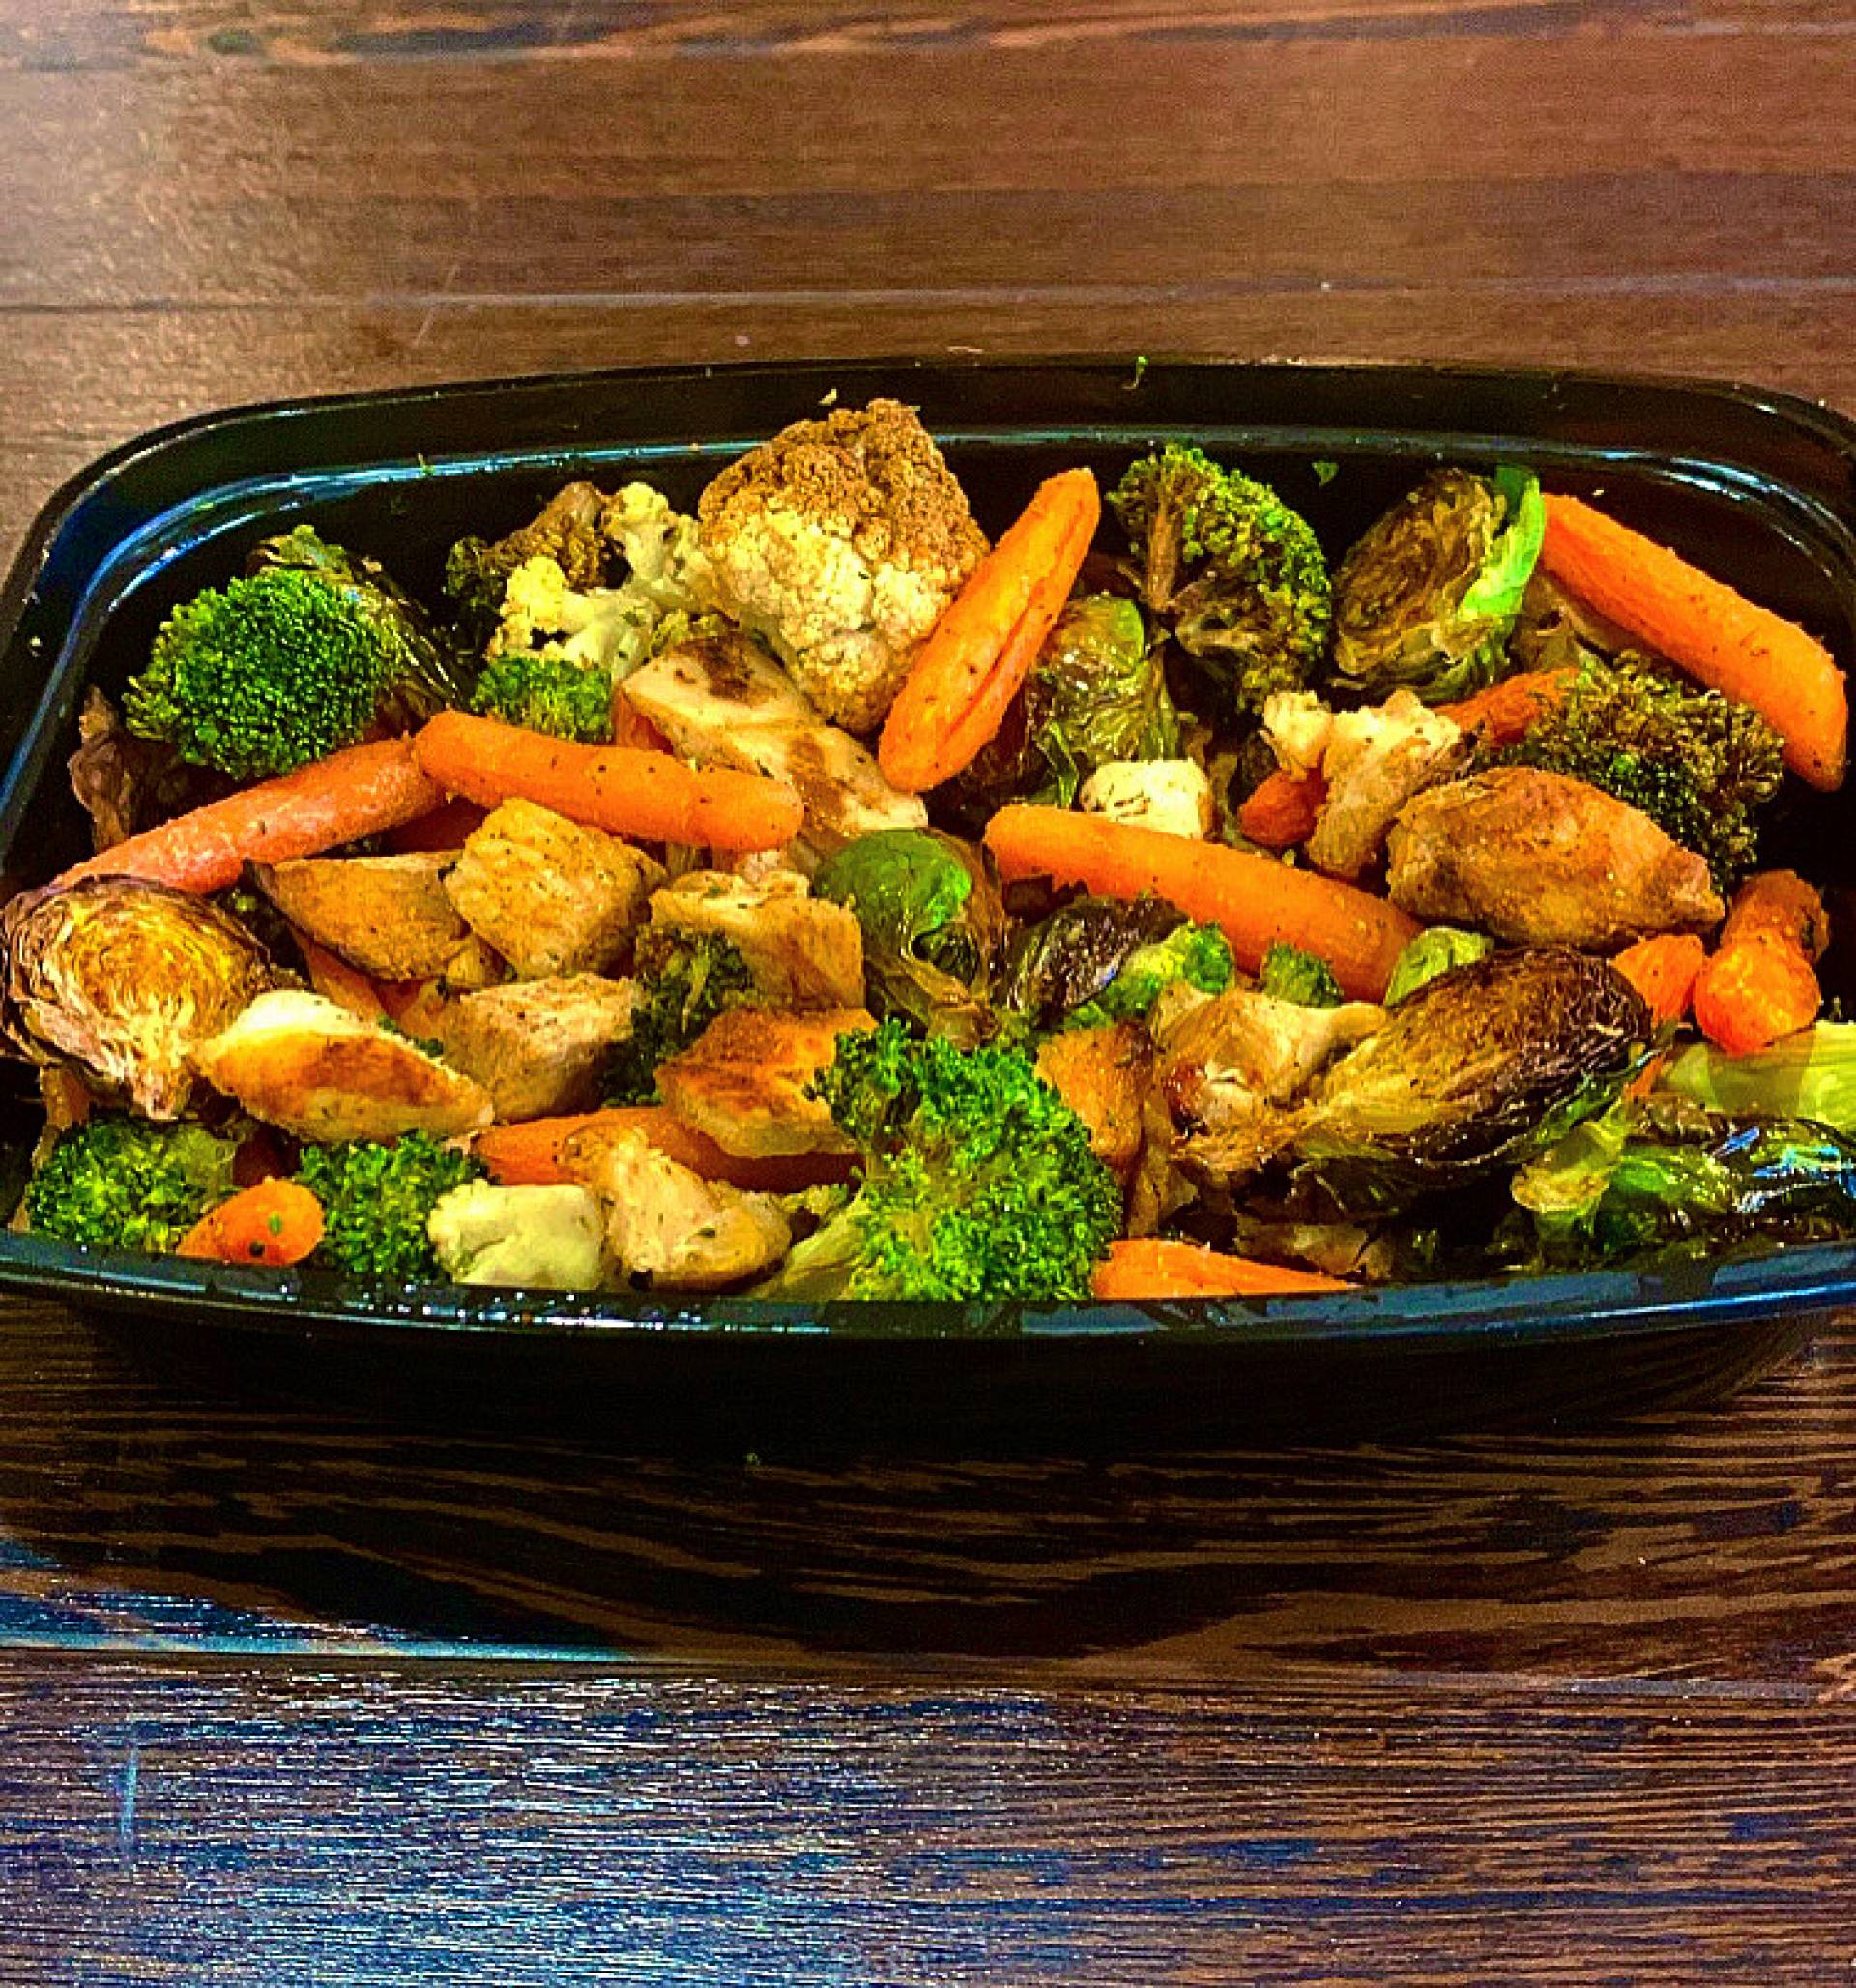 Grilled Chicken with a Roasted Balsamic Veggie Medley